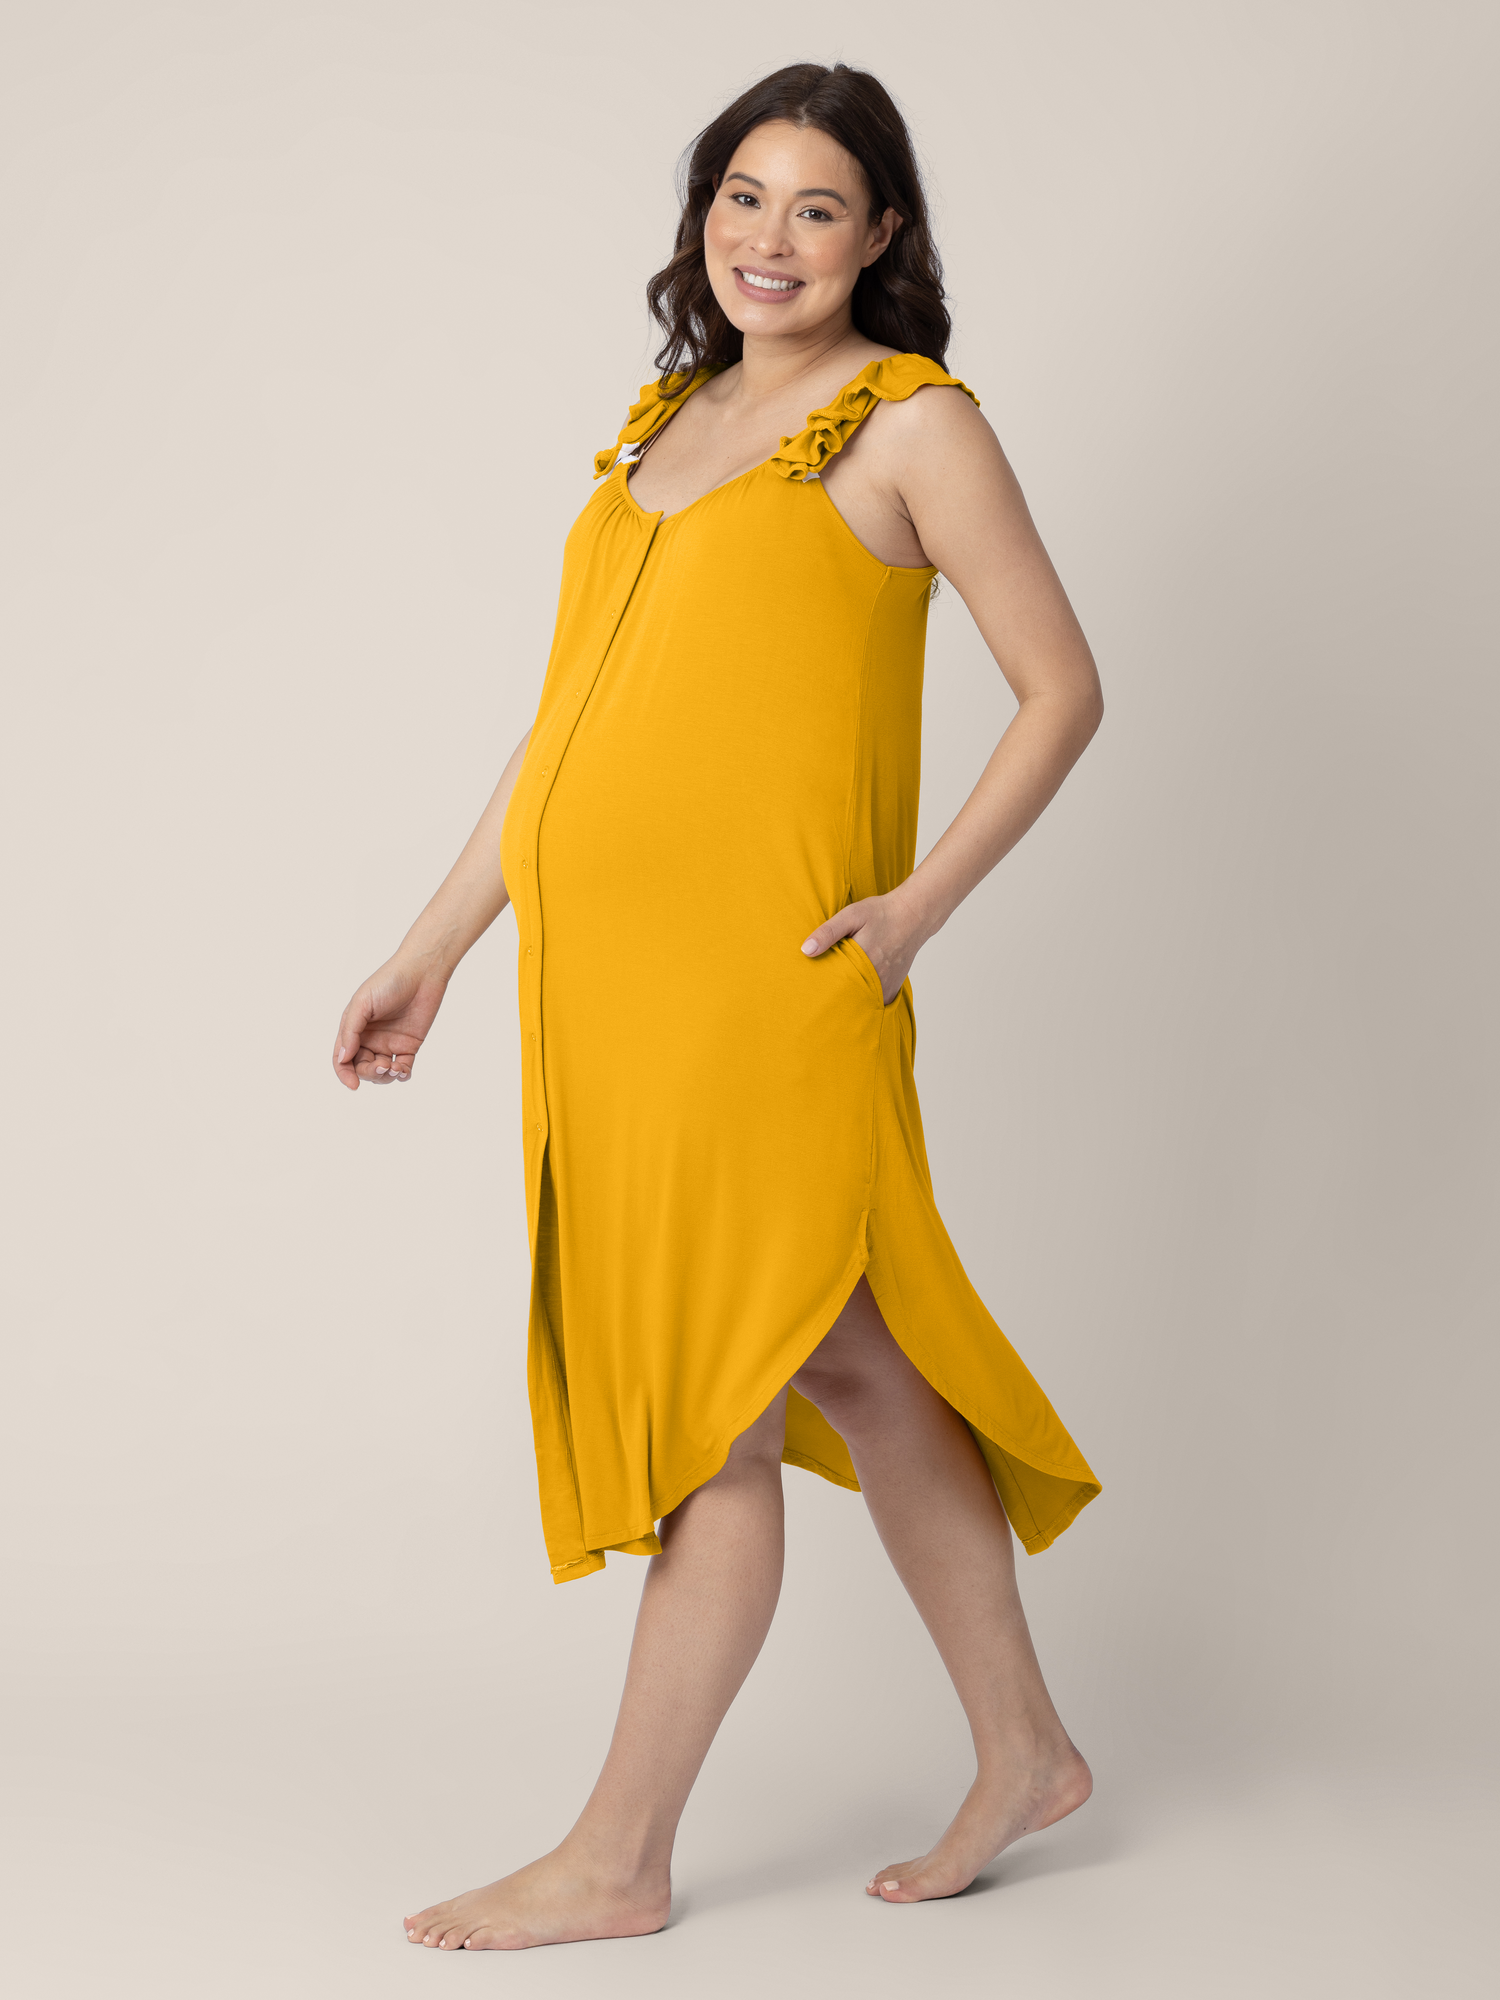 Kindred Bravely Ruffle Strap Labor & Delivery Gown - Honey, Medium/Large